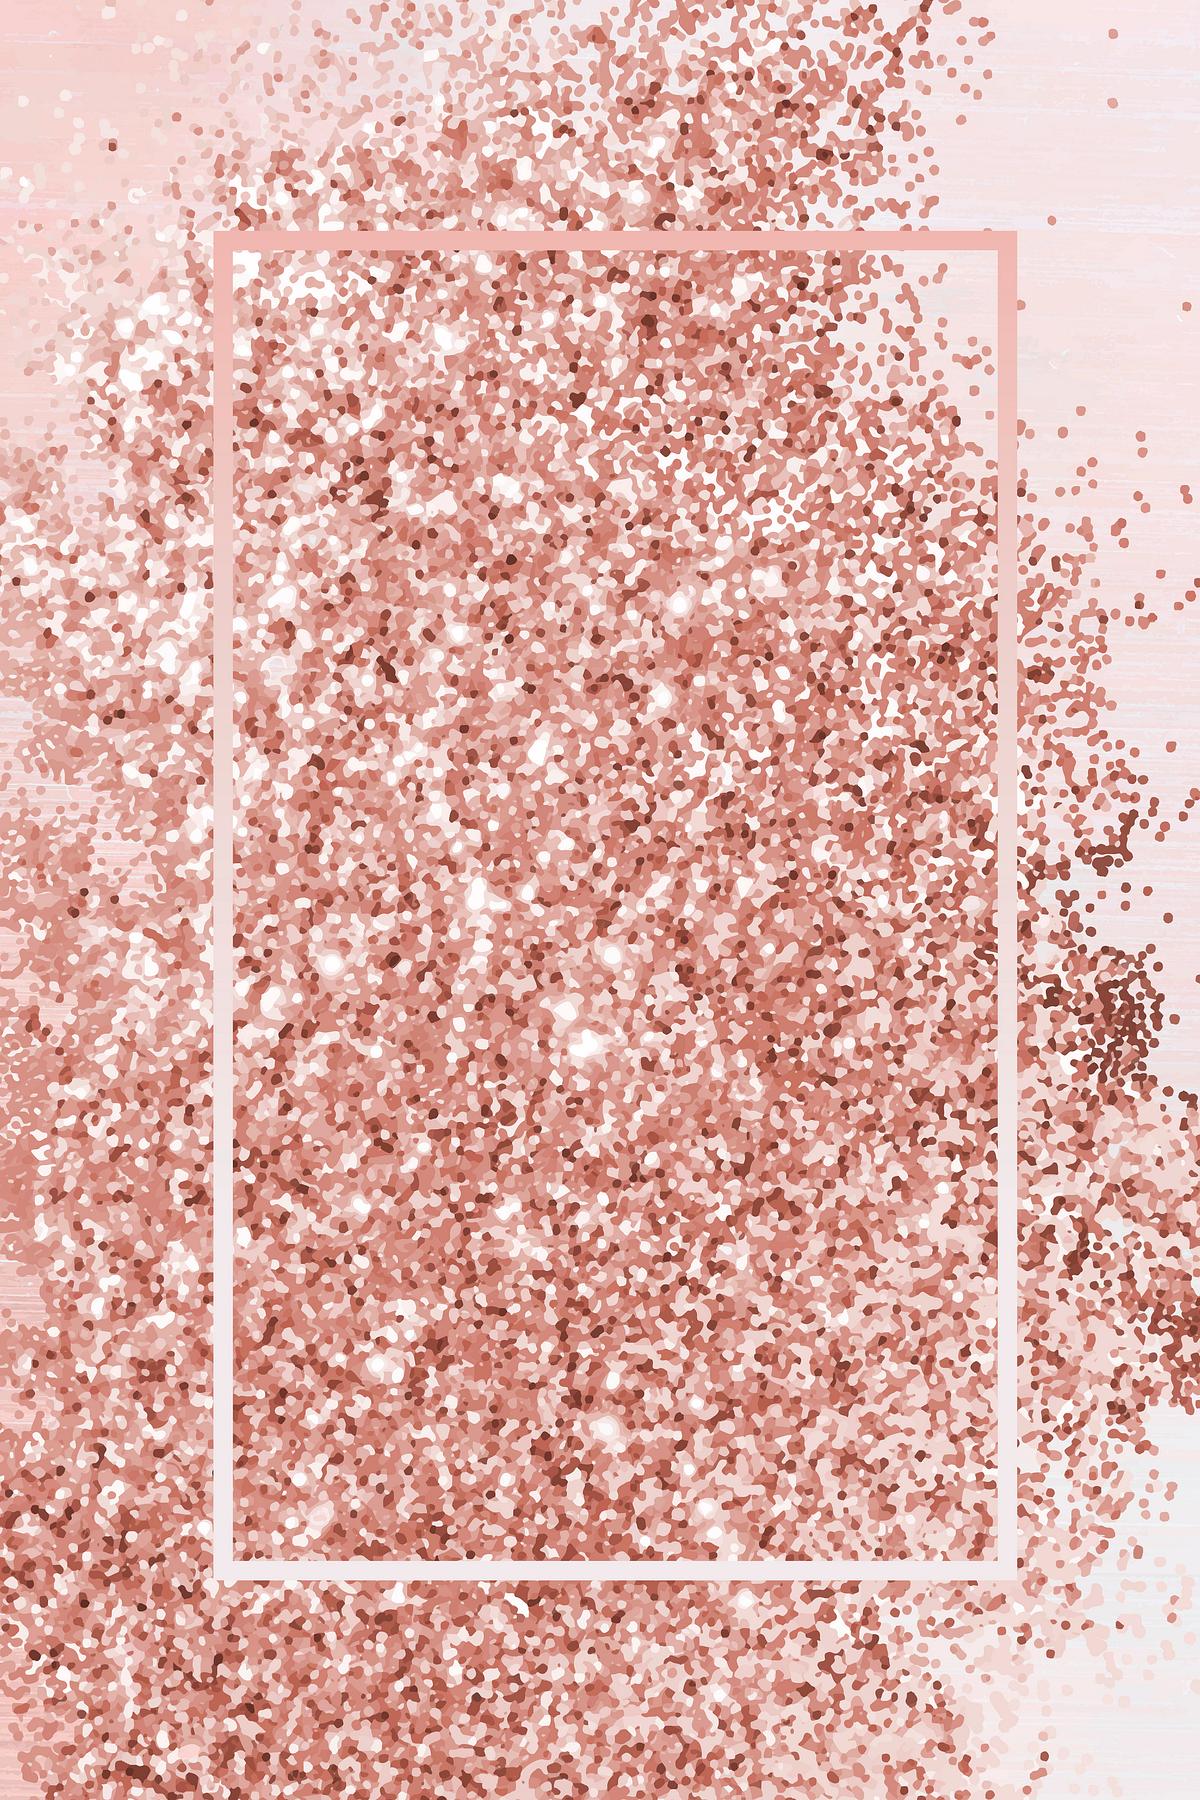 Pink glitter background | Royalty free stock vector - 938121